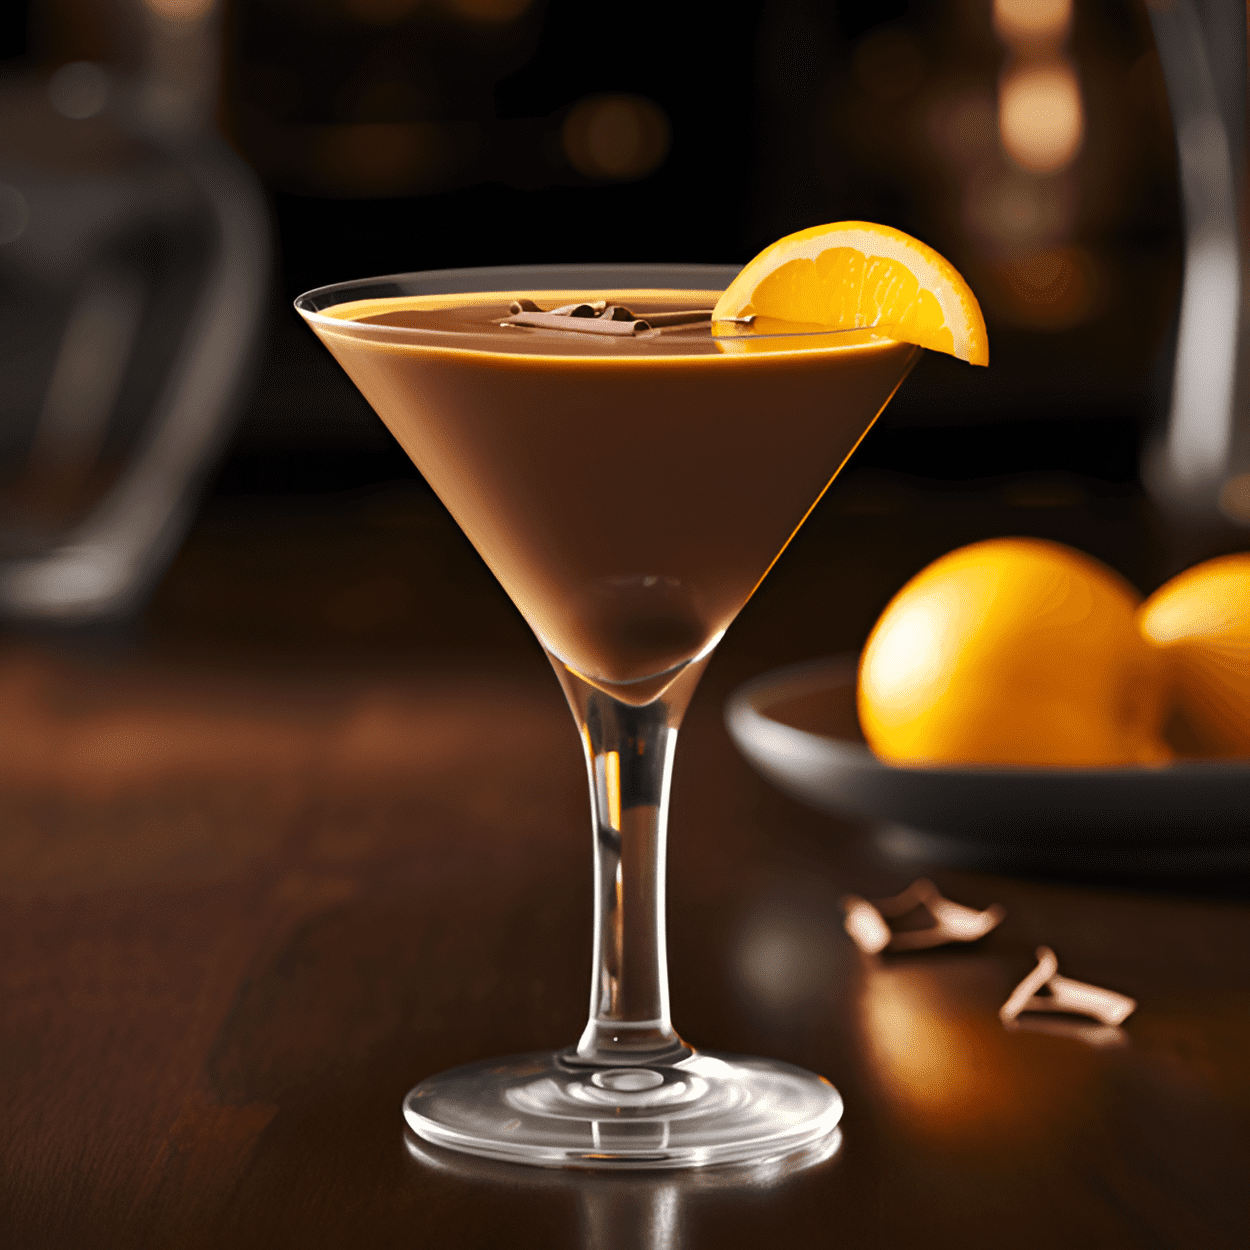 Velvet Hammer Cocktail Recipe - The Velvet Hammer is a creamy, sweet, and slightly citrusy cocktail. It has a rich, velvety texture with a hint of chocolate and orange. The taste is balanced, not too strong, and the coffee liqueur adds a subtle depth of flavor.